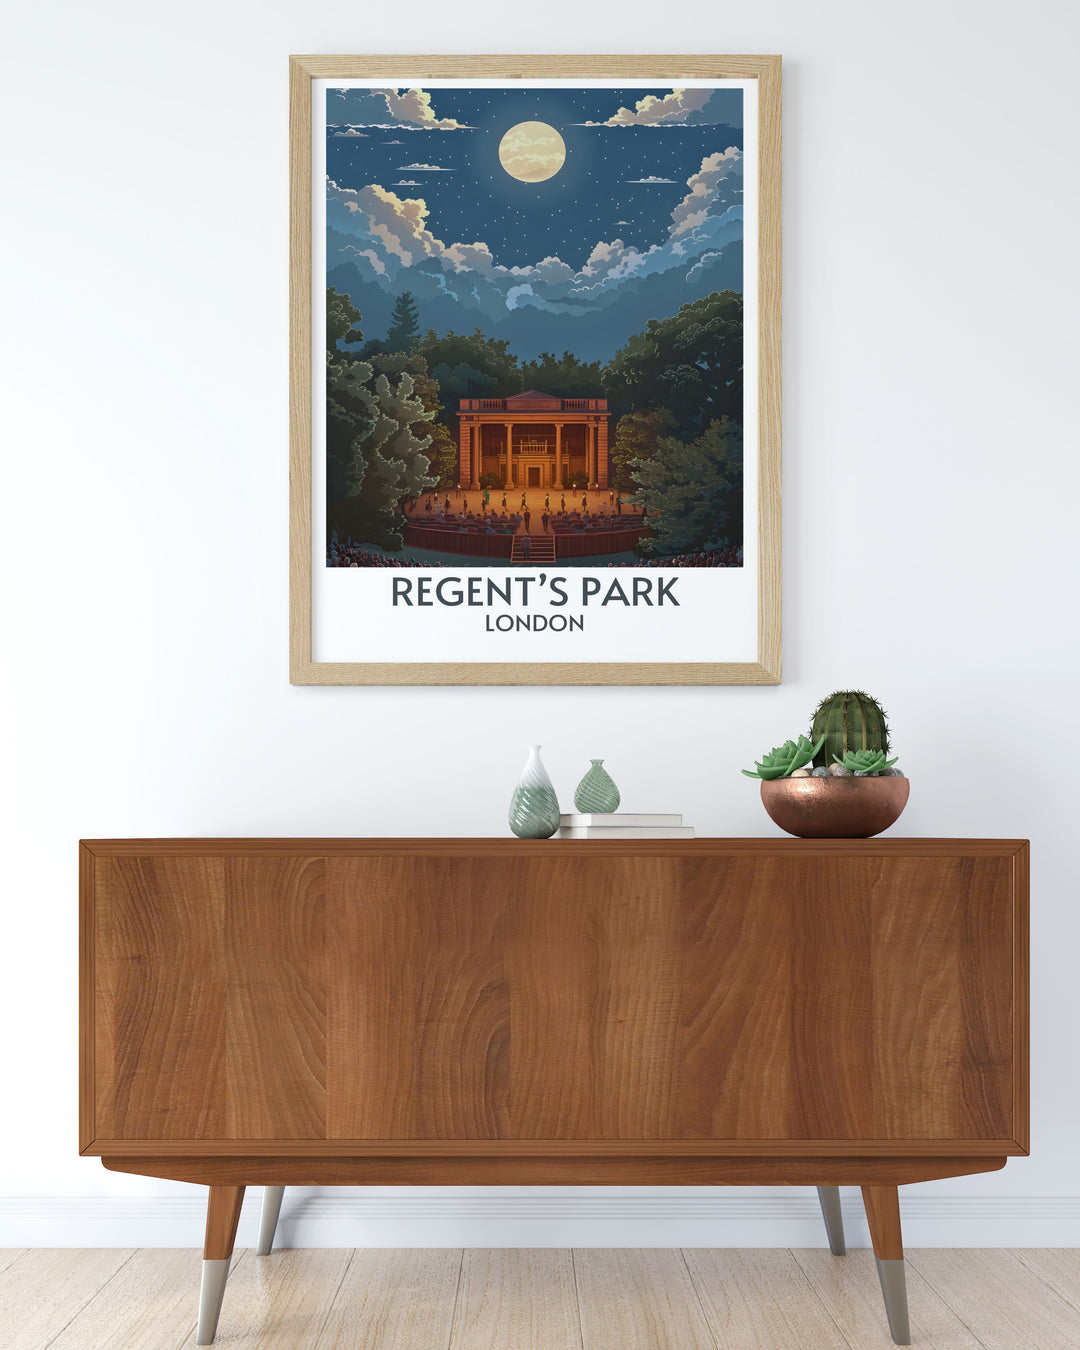 Stunning Regents Park Poster capturing the tranquil beauty of Londons famous park, ideal for adding a touch of nature to your living space.